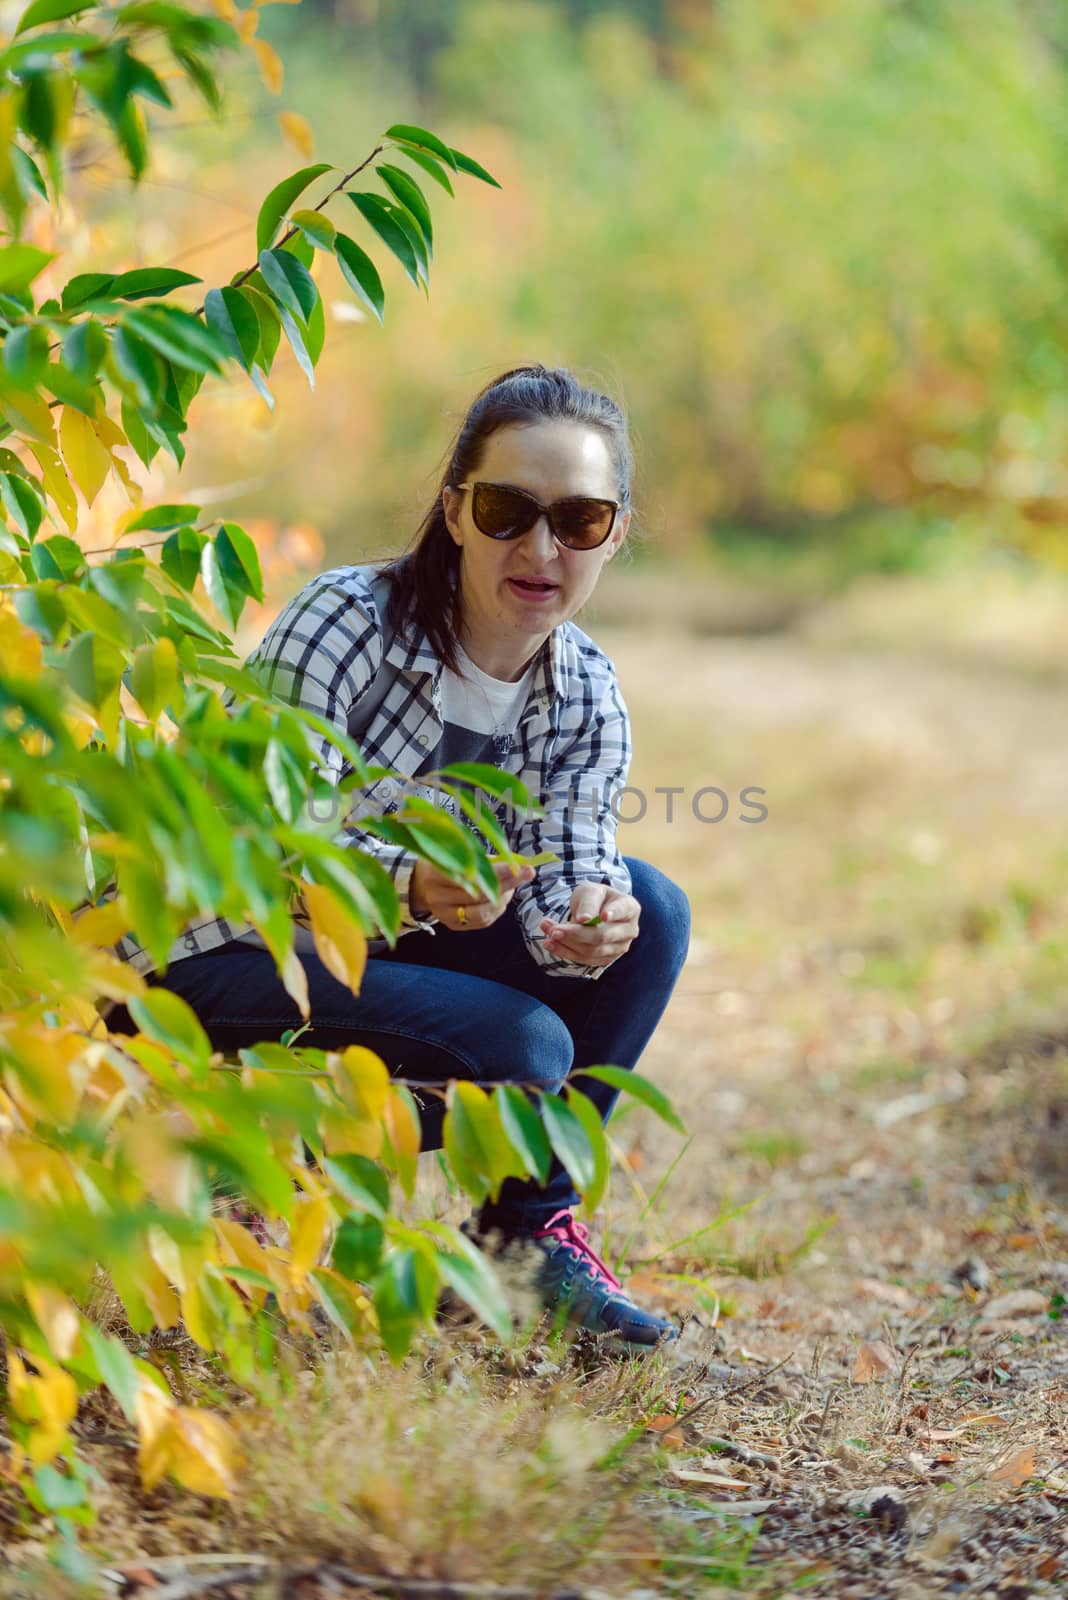 Autumn attractive woman portrait smiling outdoors at the park. A by Brejeq